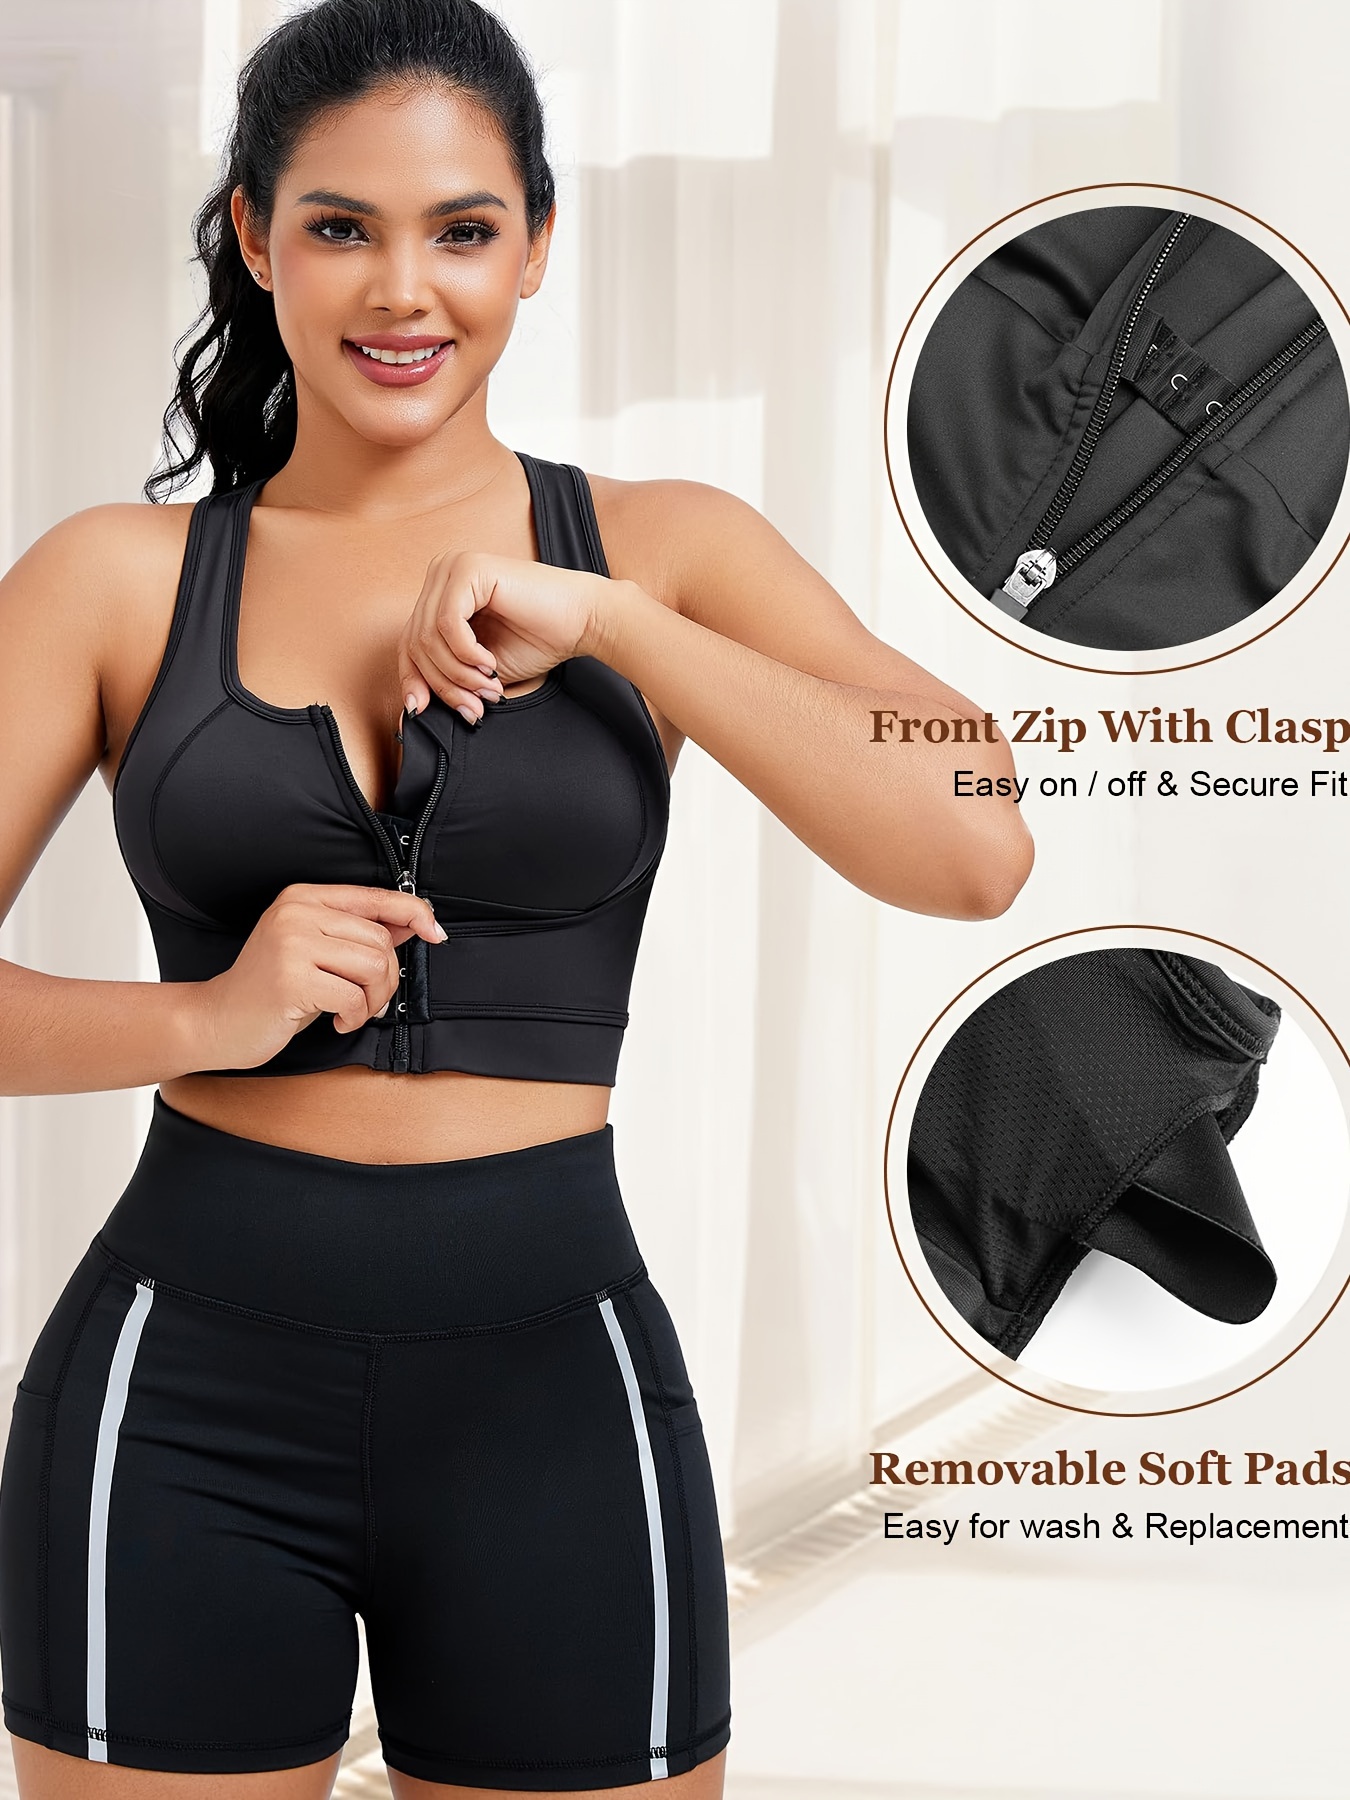 Eggplant Front Zip Sports Bra, Supportive Workout Bra